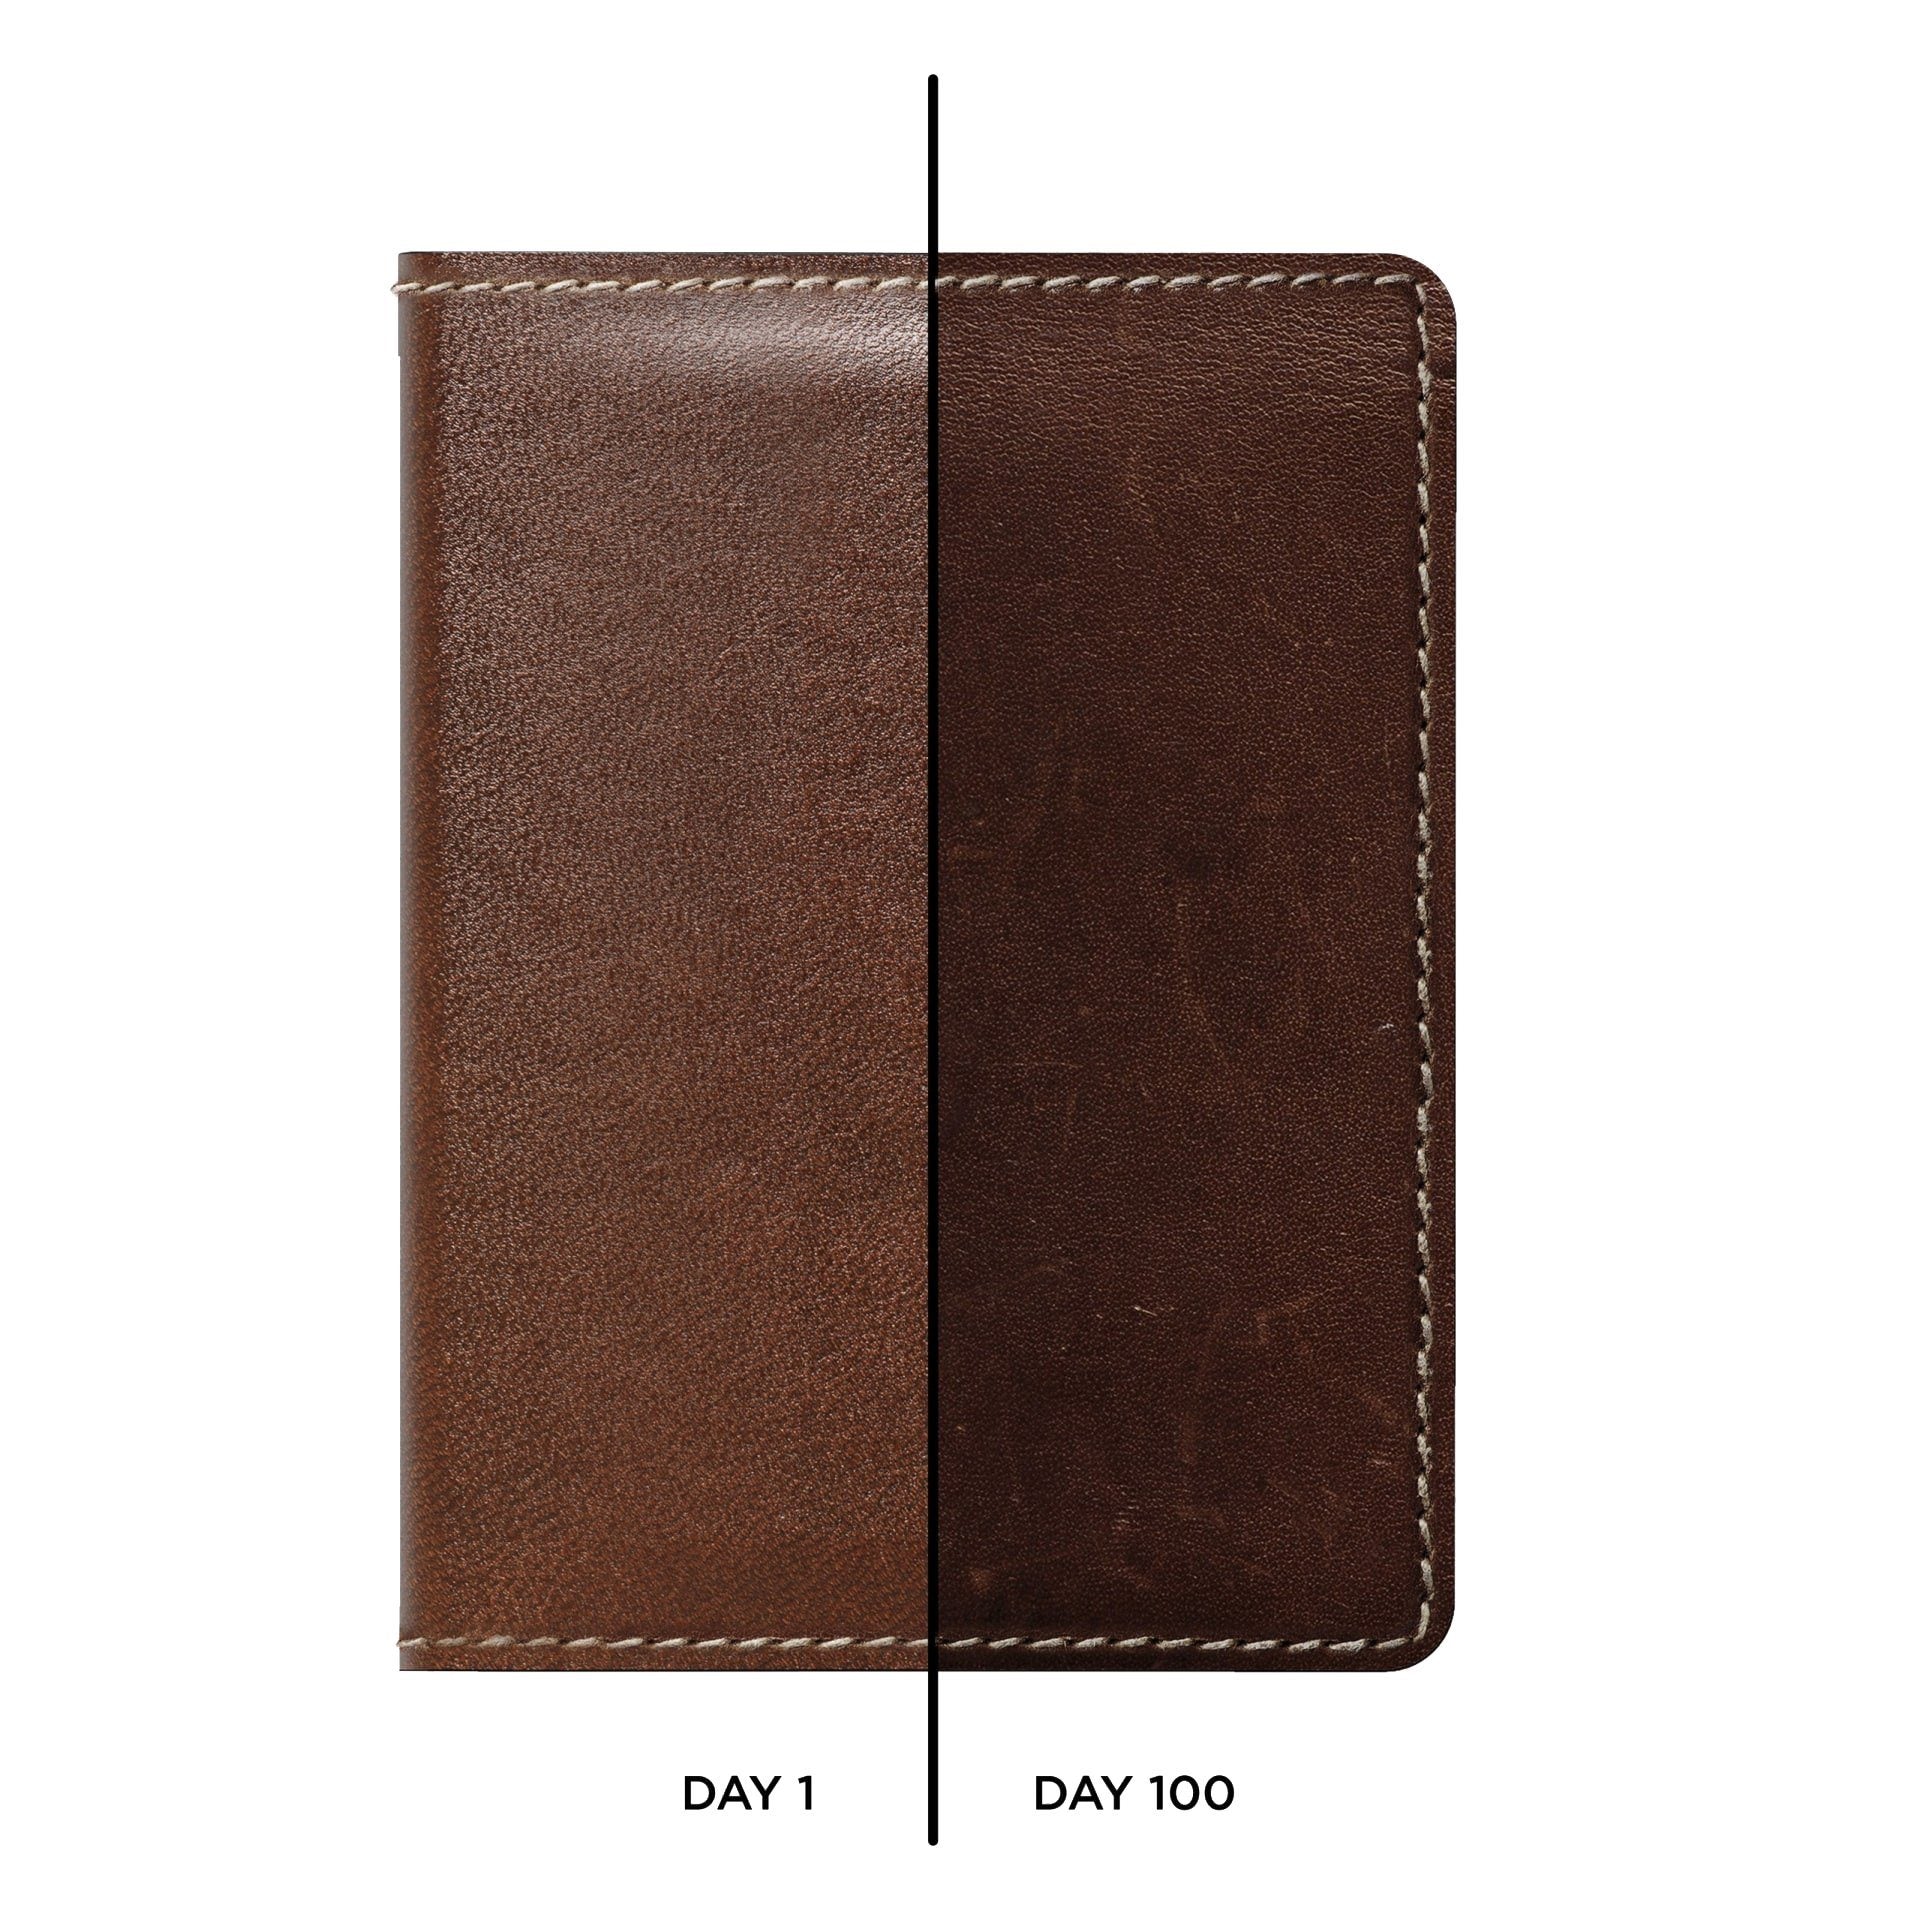 NOMAD Slim Horween Leather Wallet with Tile Tracking, Rustic Brown Wallet NOMAD 